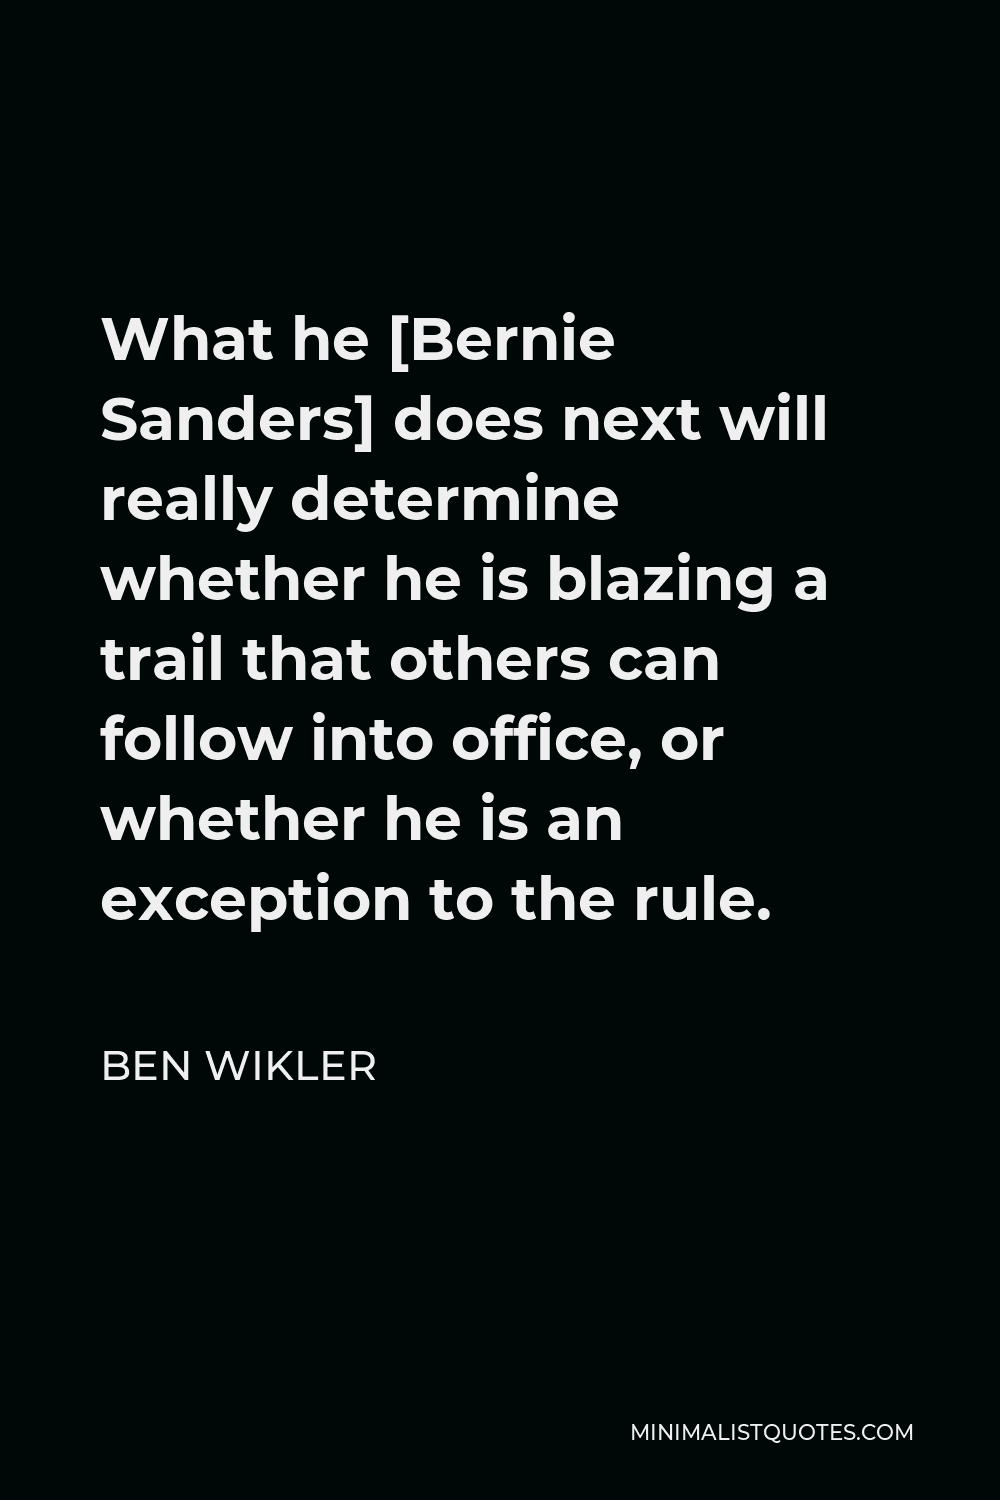 Ben Wikler Quote - What he [Bernie Sanders] does next will really determine whether he is blazing a trail that others can follow into office, or whether he is an exception to the rule.